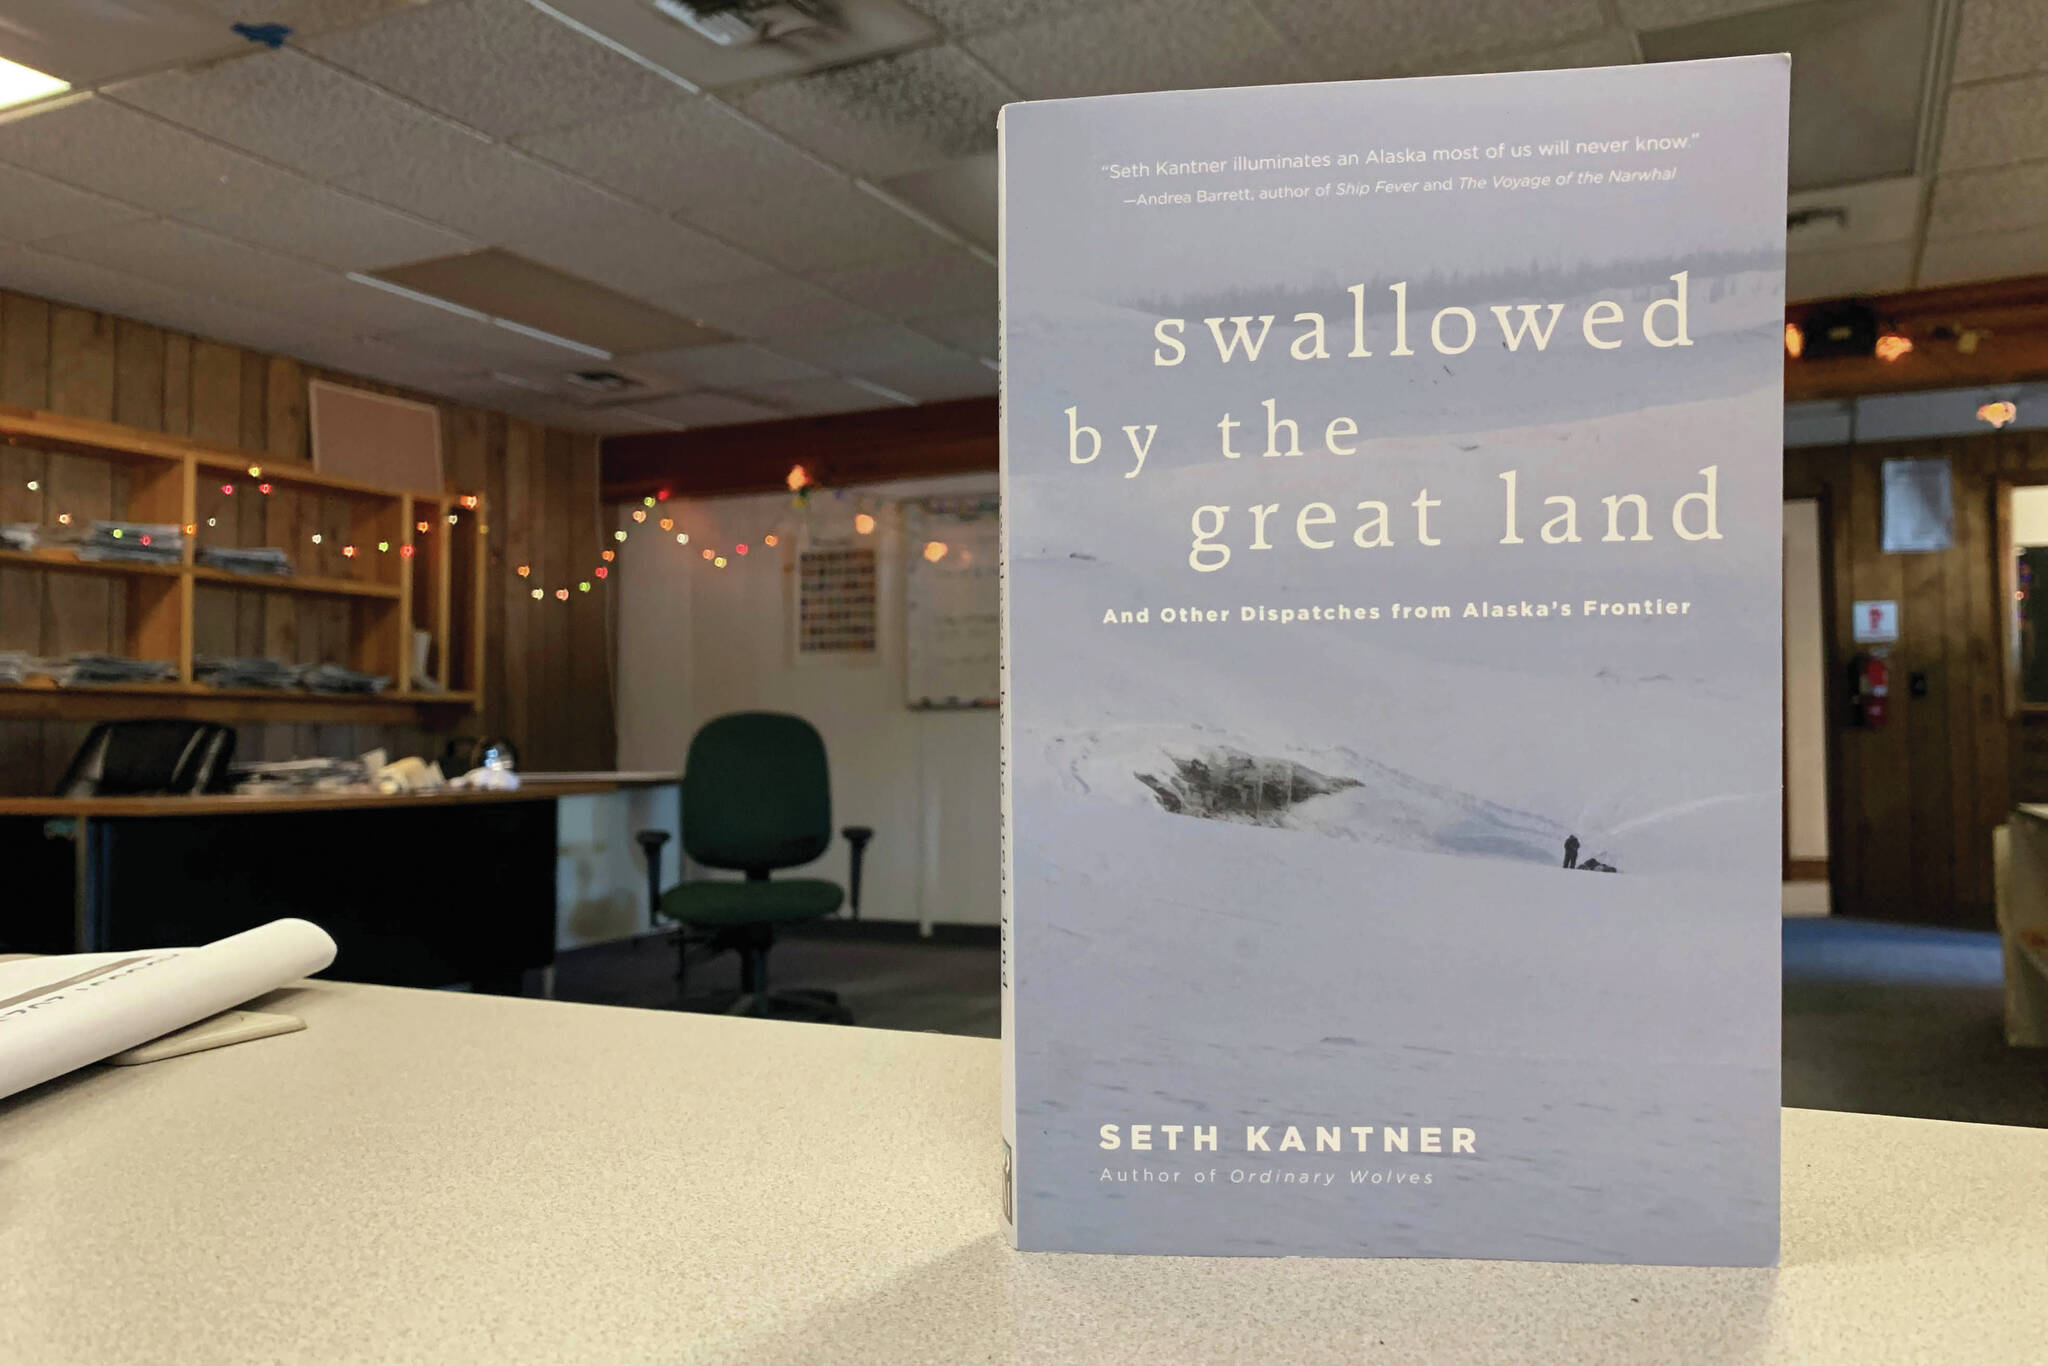 Ashlyn O’Hara/Peninsula Clarion
A copy of “Swallowed by the Great Land” sits on a desk in the Peninsula Clarion offices on Thursday in Kenai.